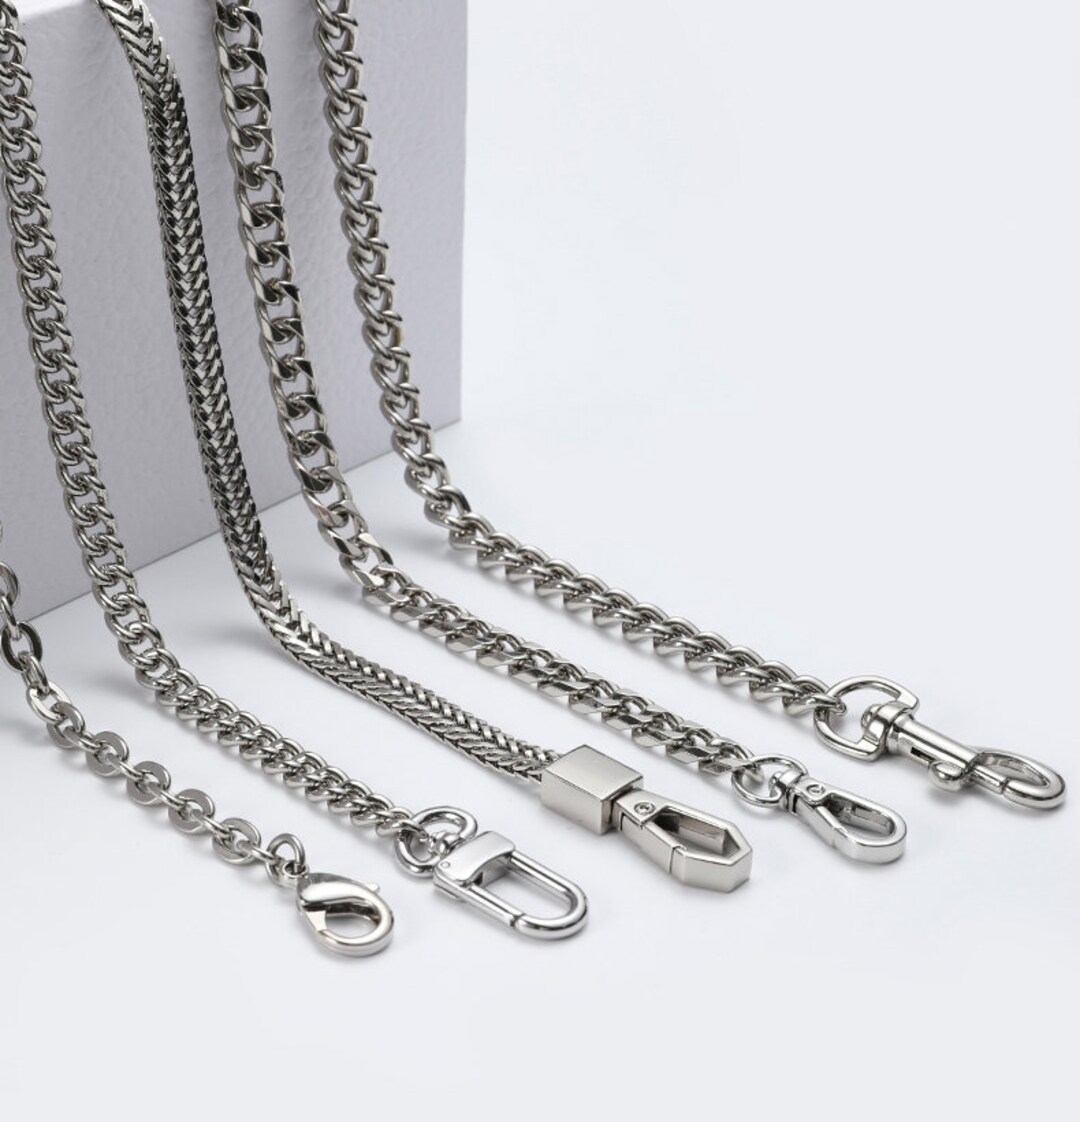 Silver High Quality Purse Chain Strap,alloy and Iron, Metal Shoulder  Handbag Strap,purse Replacement Chains,bag Accessories, JD-1920 